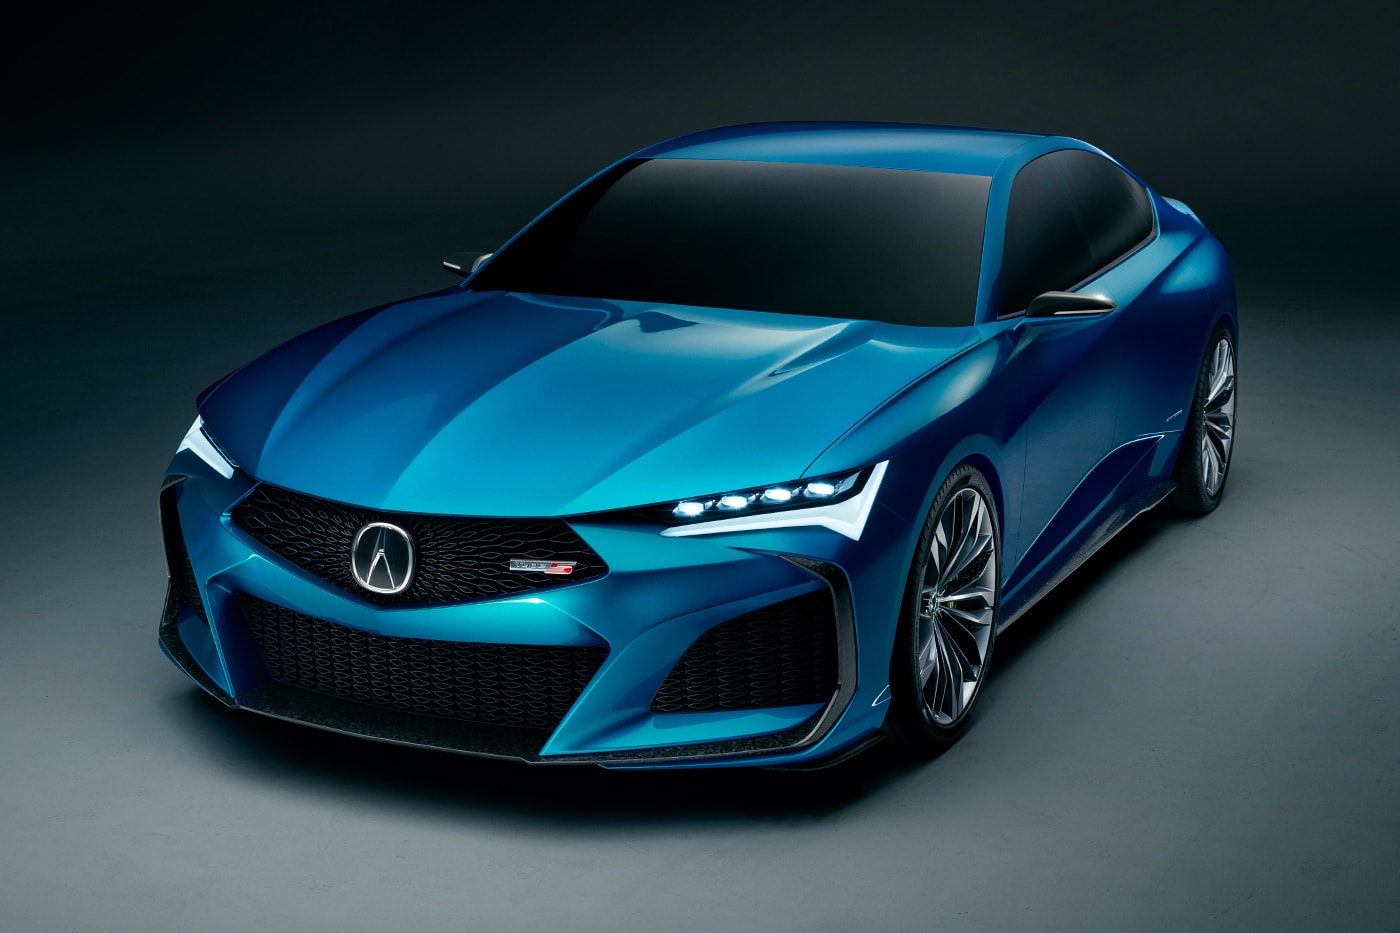 Acura Type S Concept Monterey Car Week Debut show automobile TLX performance motorsports